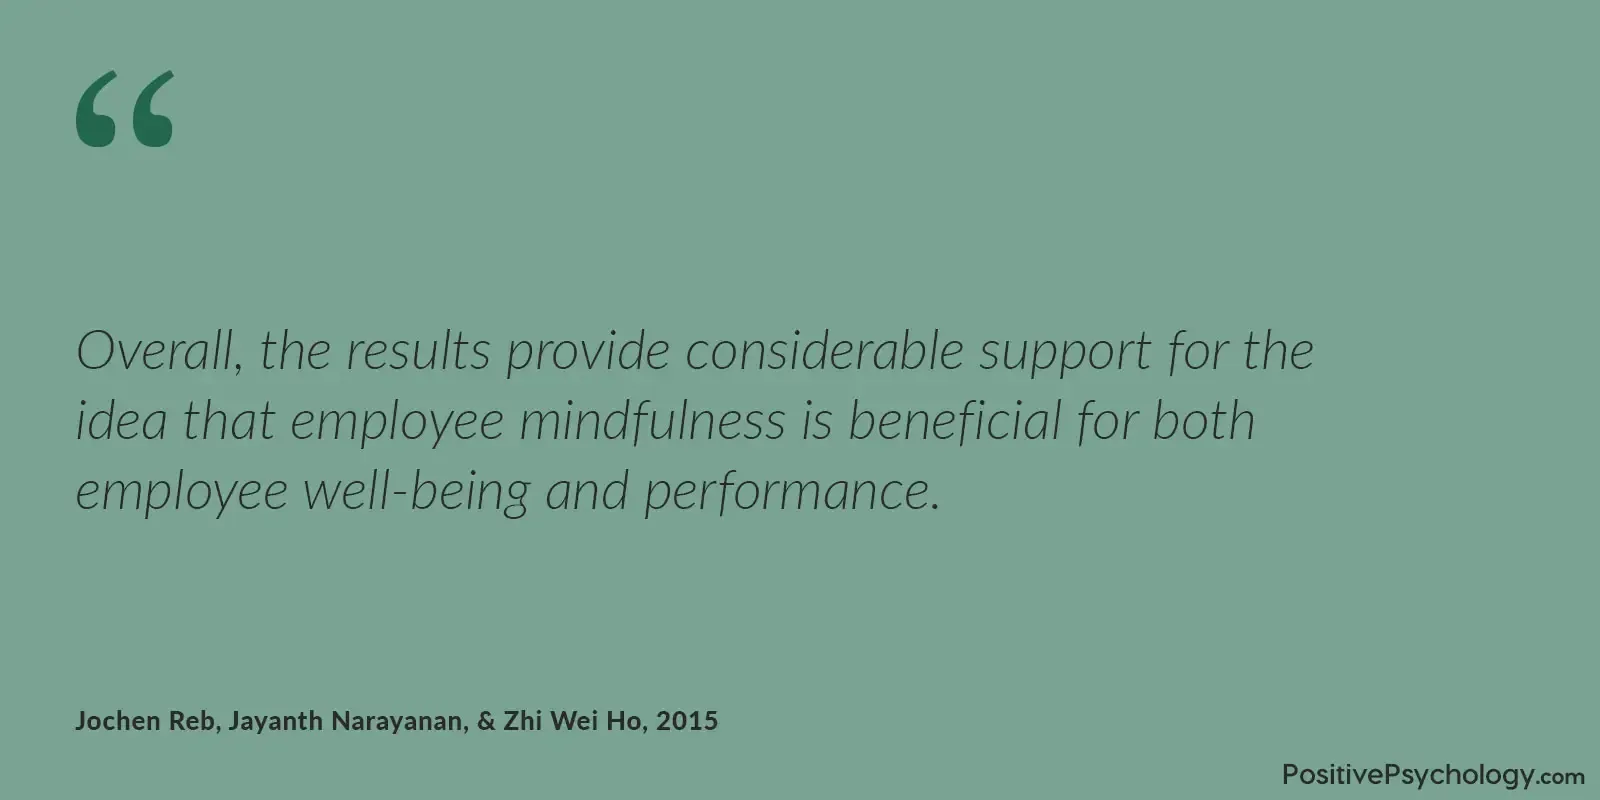 Employee mindfulness is beneficial